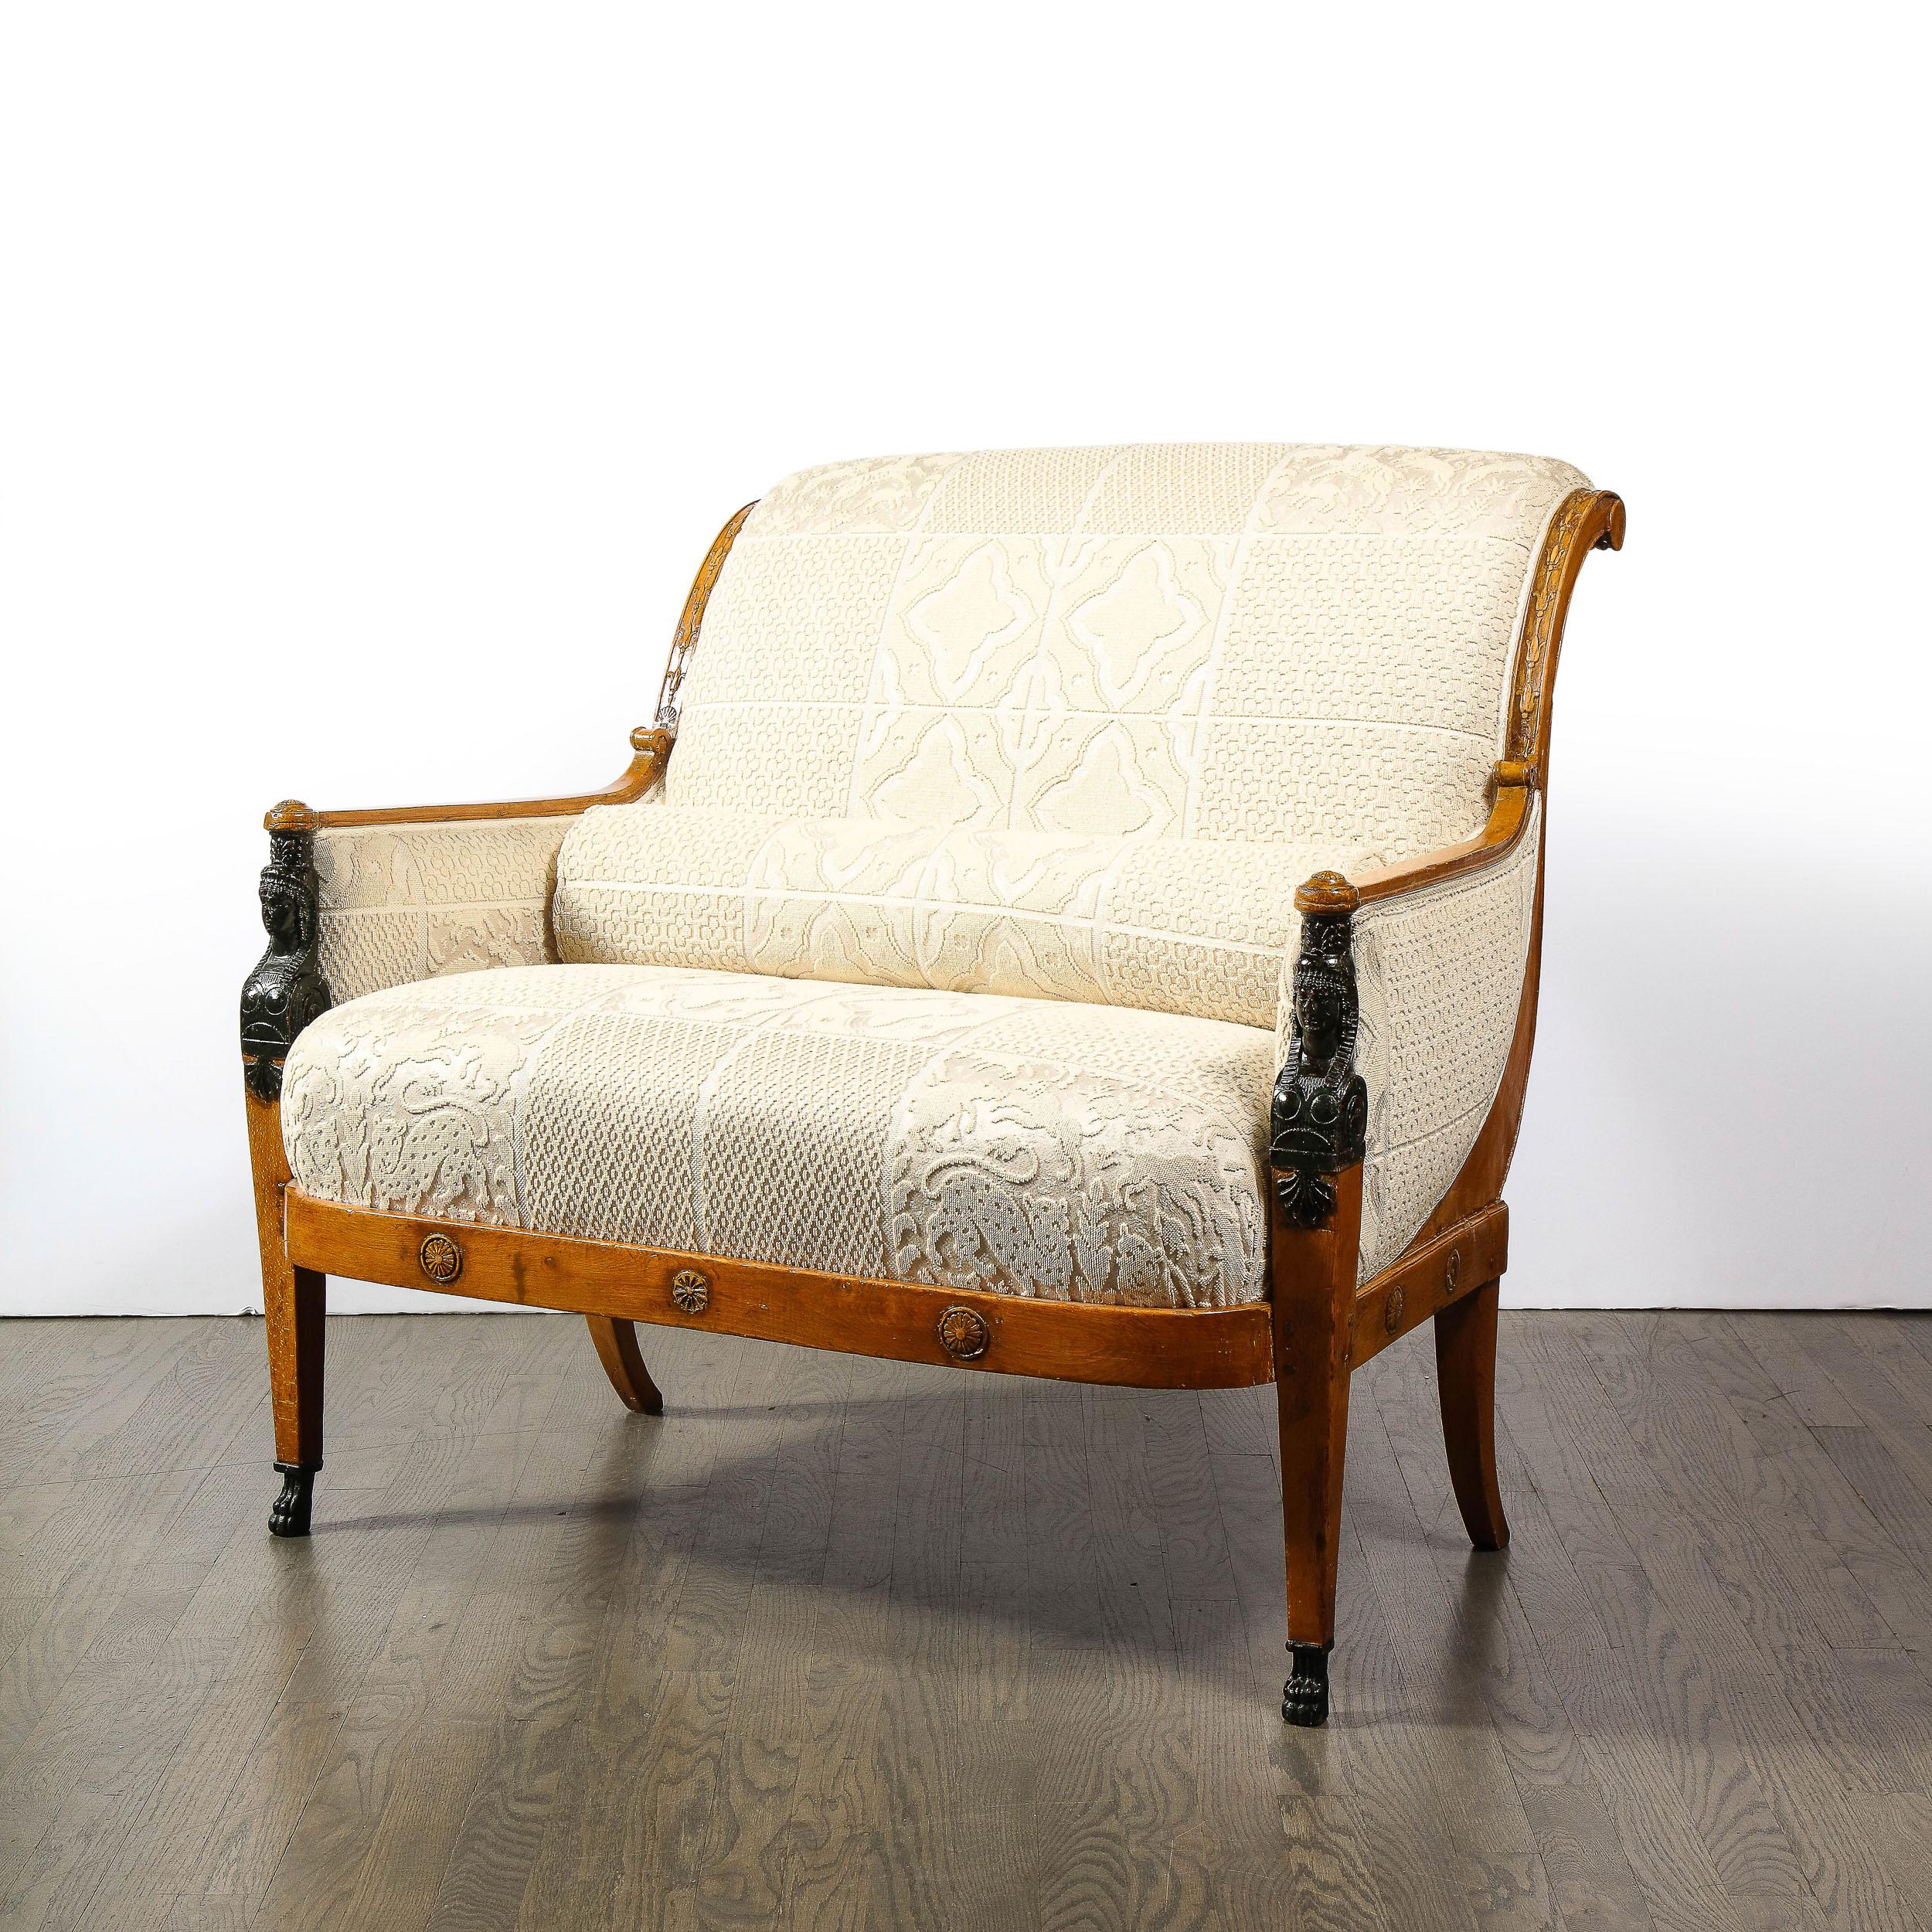 Mid-19th Century Biedermeier Neoclassical Settee with Scroll Form Back & Saber Leg Supports  For Sale